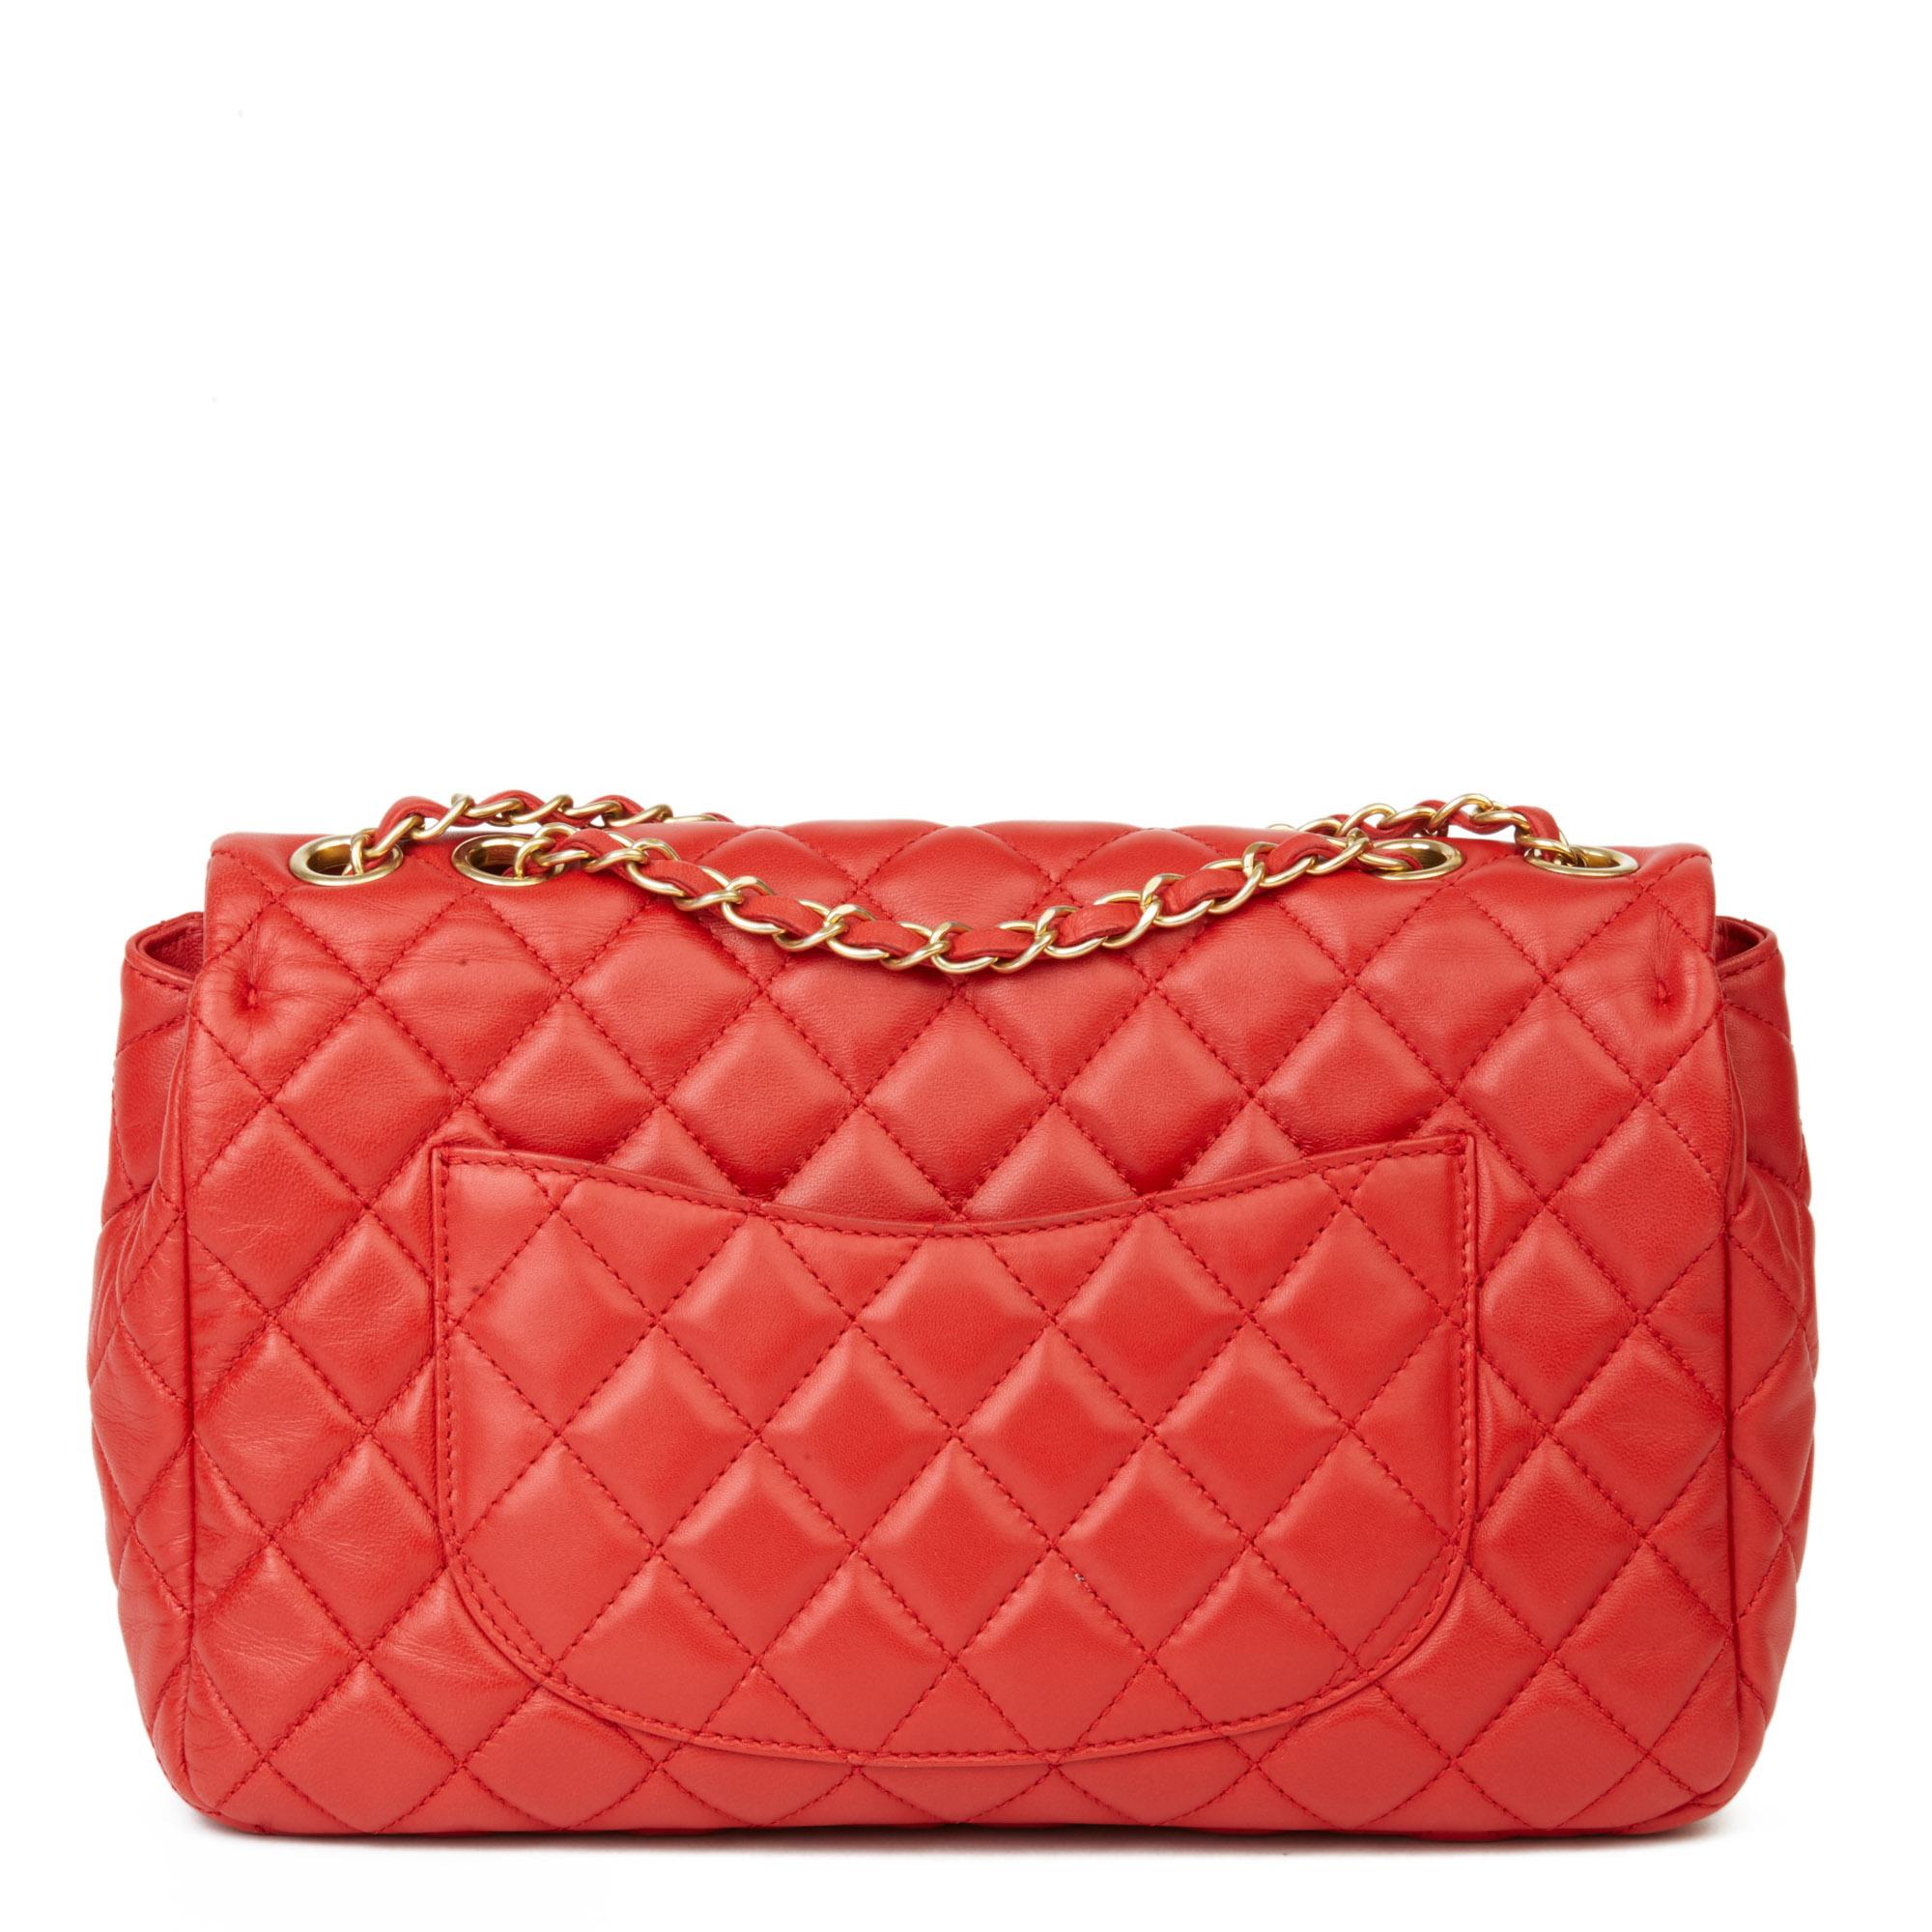 Women's 2014 Chanel Lipstick Red Quilted Lambskin Classic Single Flap Bag